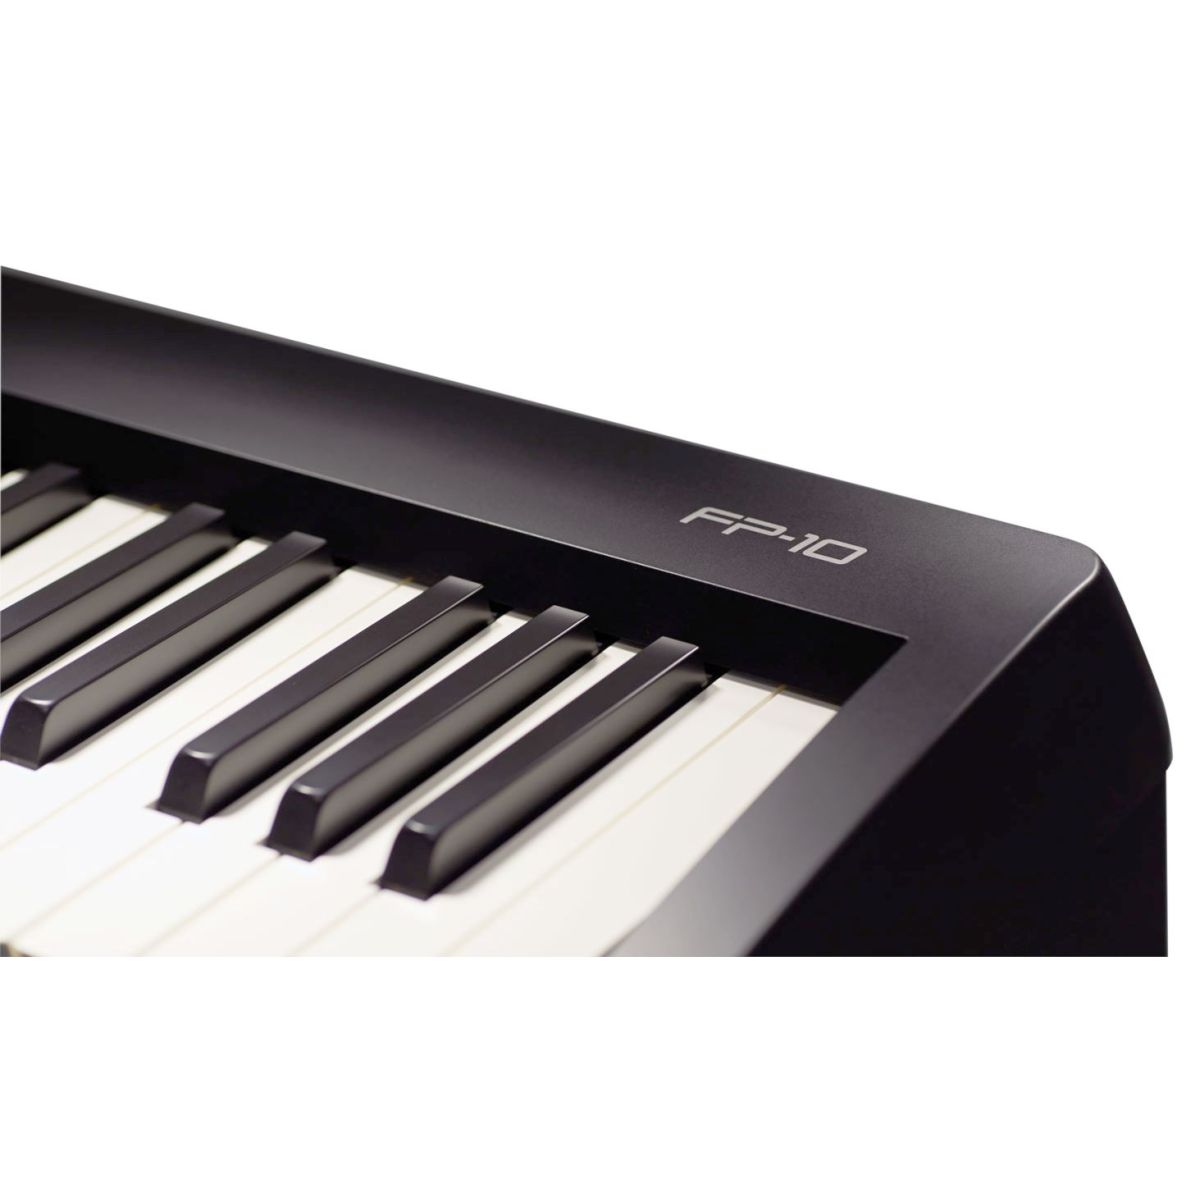 Accessoire Claviers et Pianos Stay Music Compact Model White stand clavier